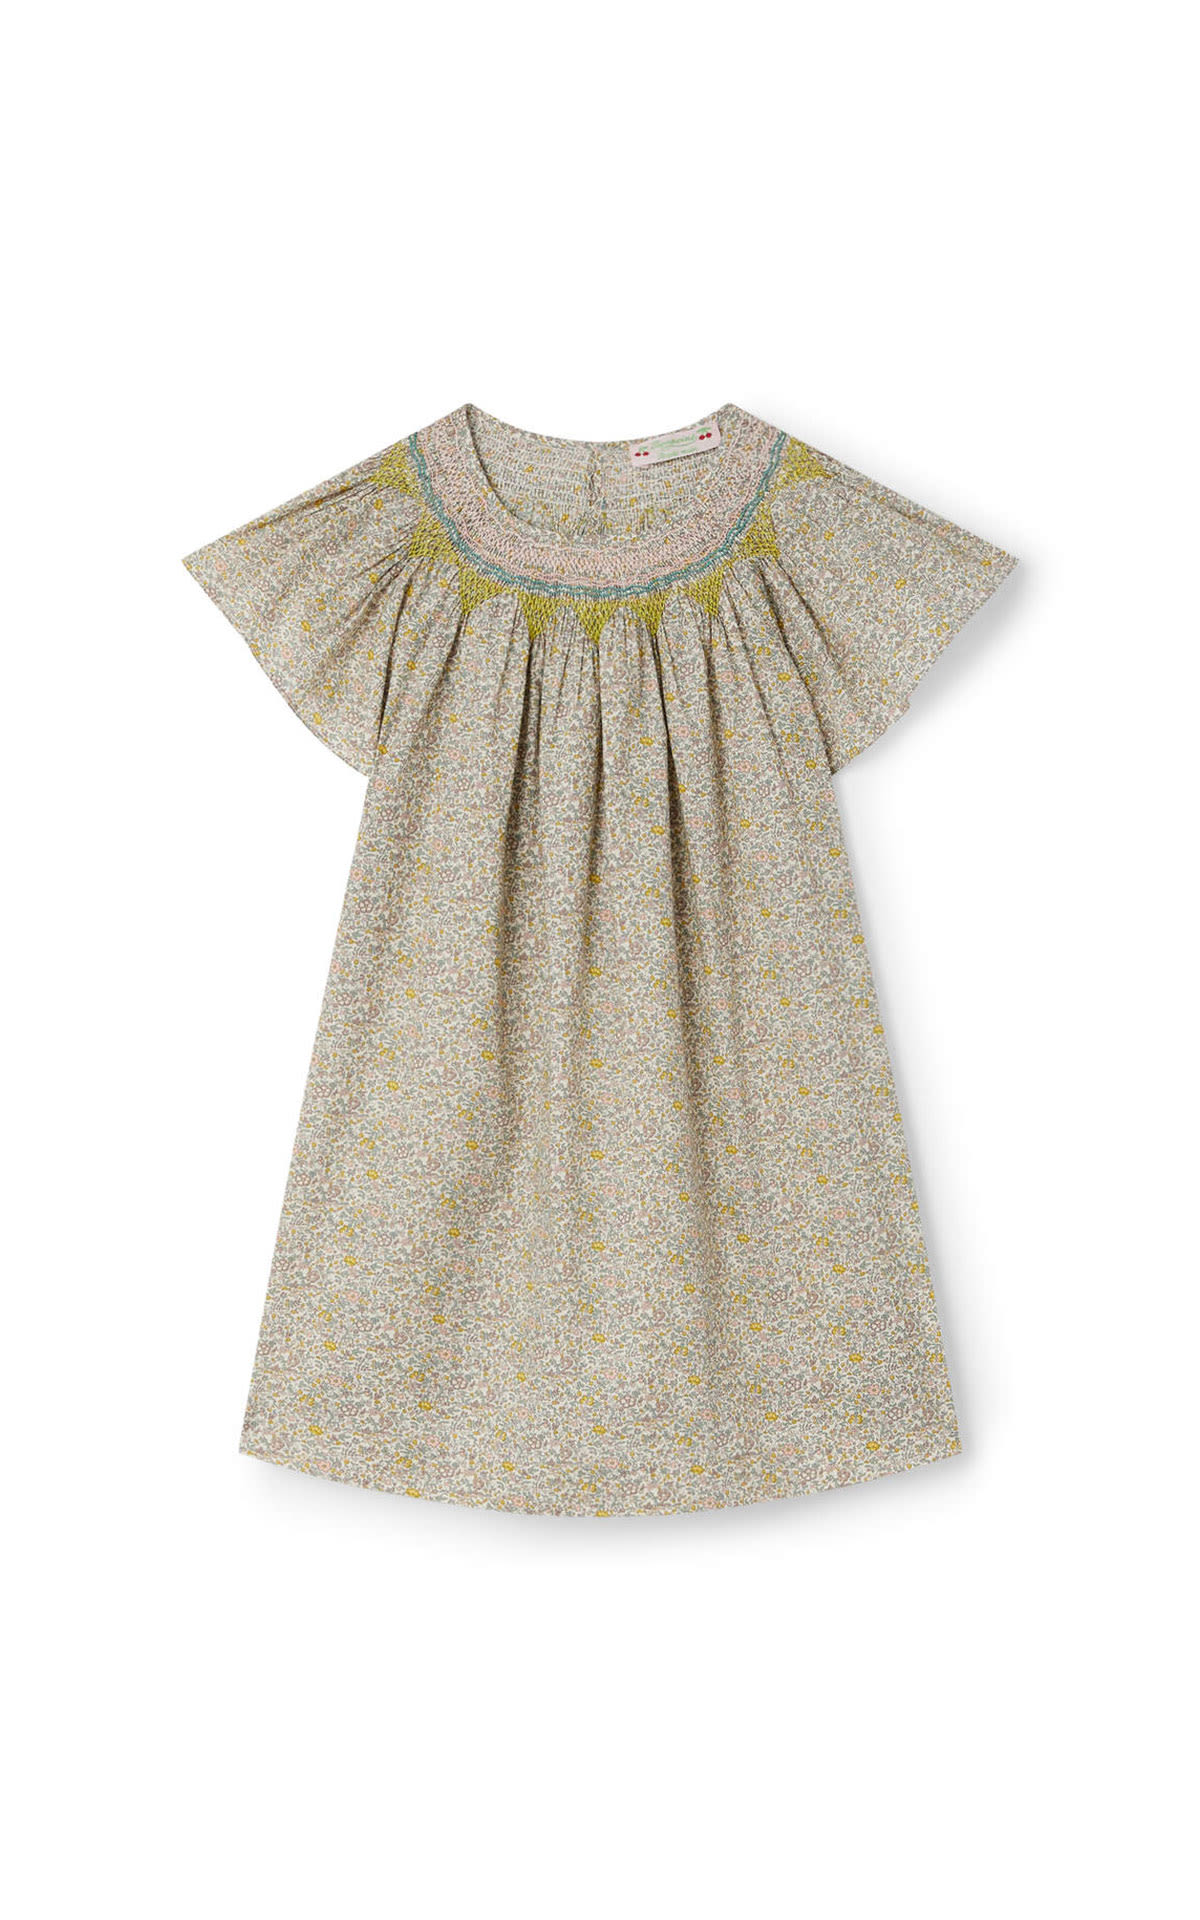 Bonpoint Girl's liberty dress from Bicester Village